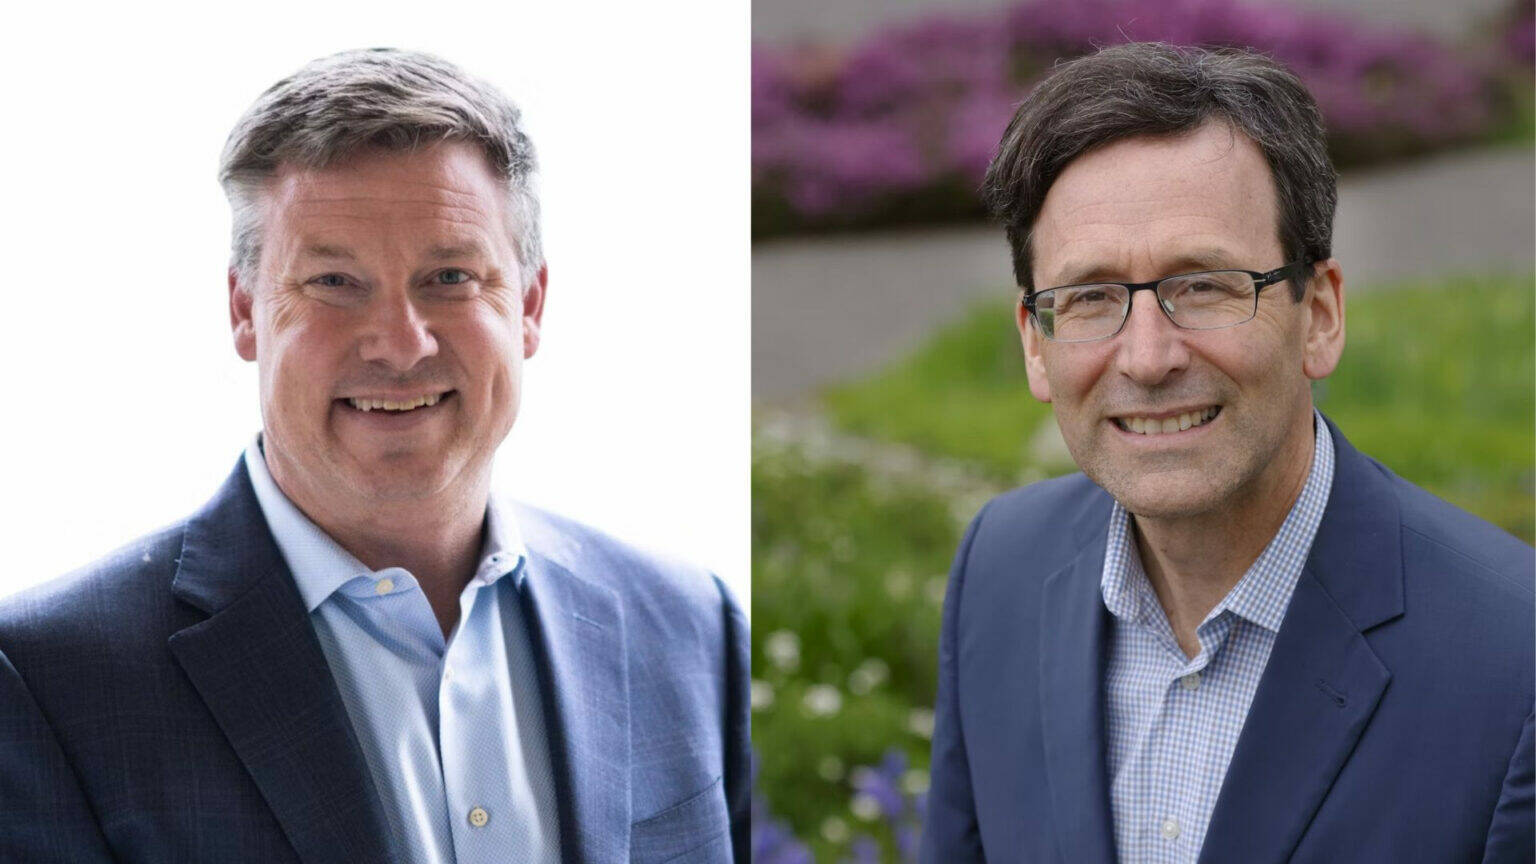 State Sen. Mark Mullet, left, and Attorney General Bob Ferguson, right, are both running as Democrats for governor in 2024. (Photos courtesy of Mullet and Ferguson campaigns)